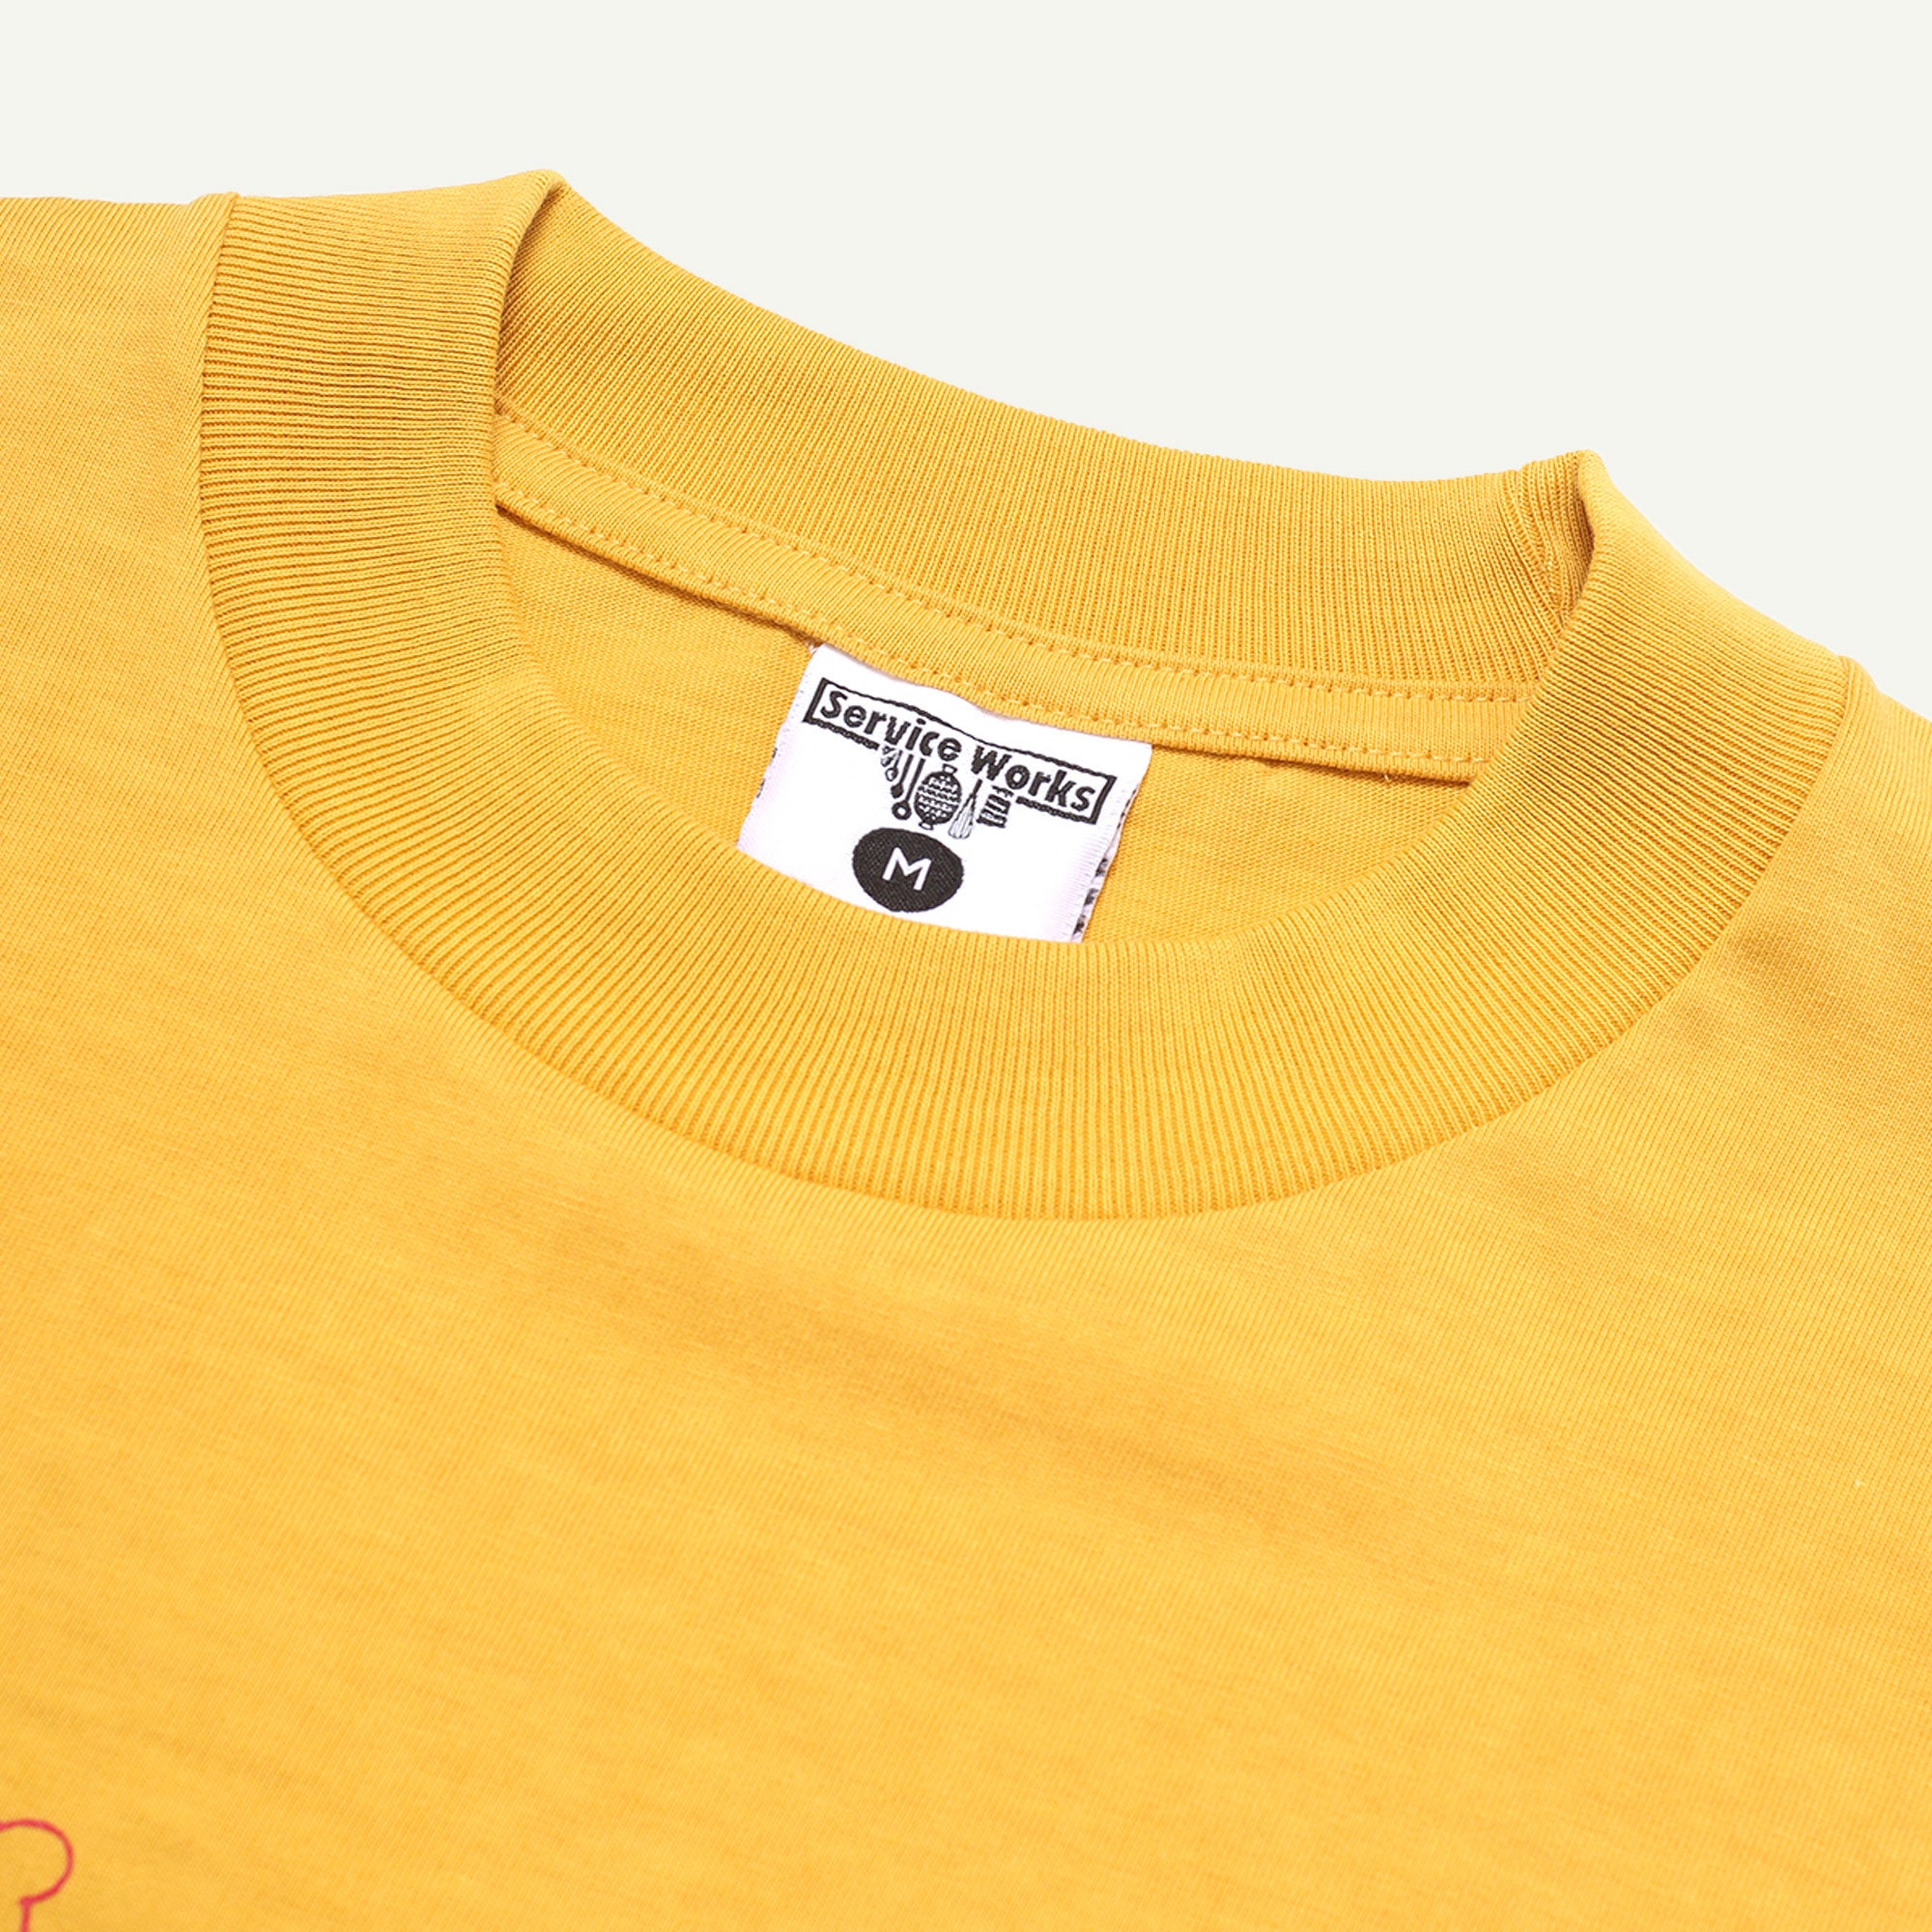 Service Works Gold Chase T-Shirt